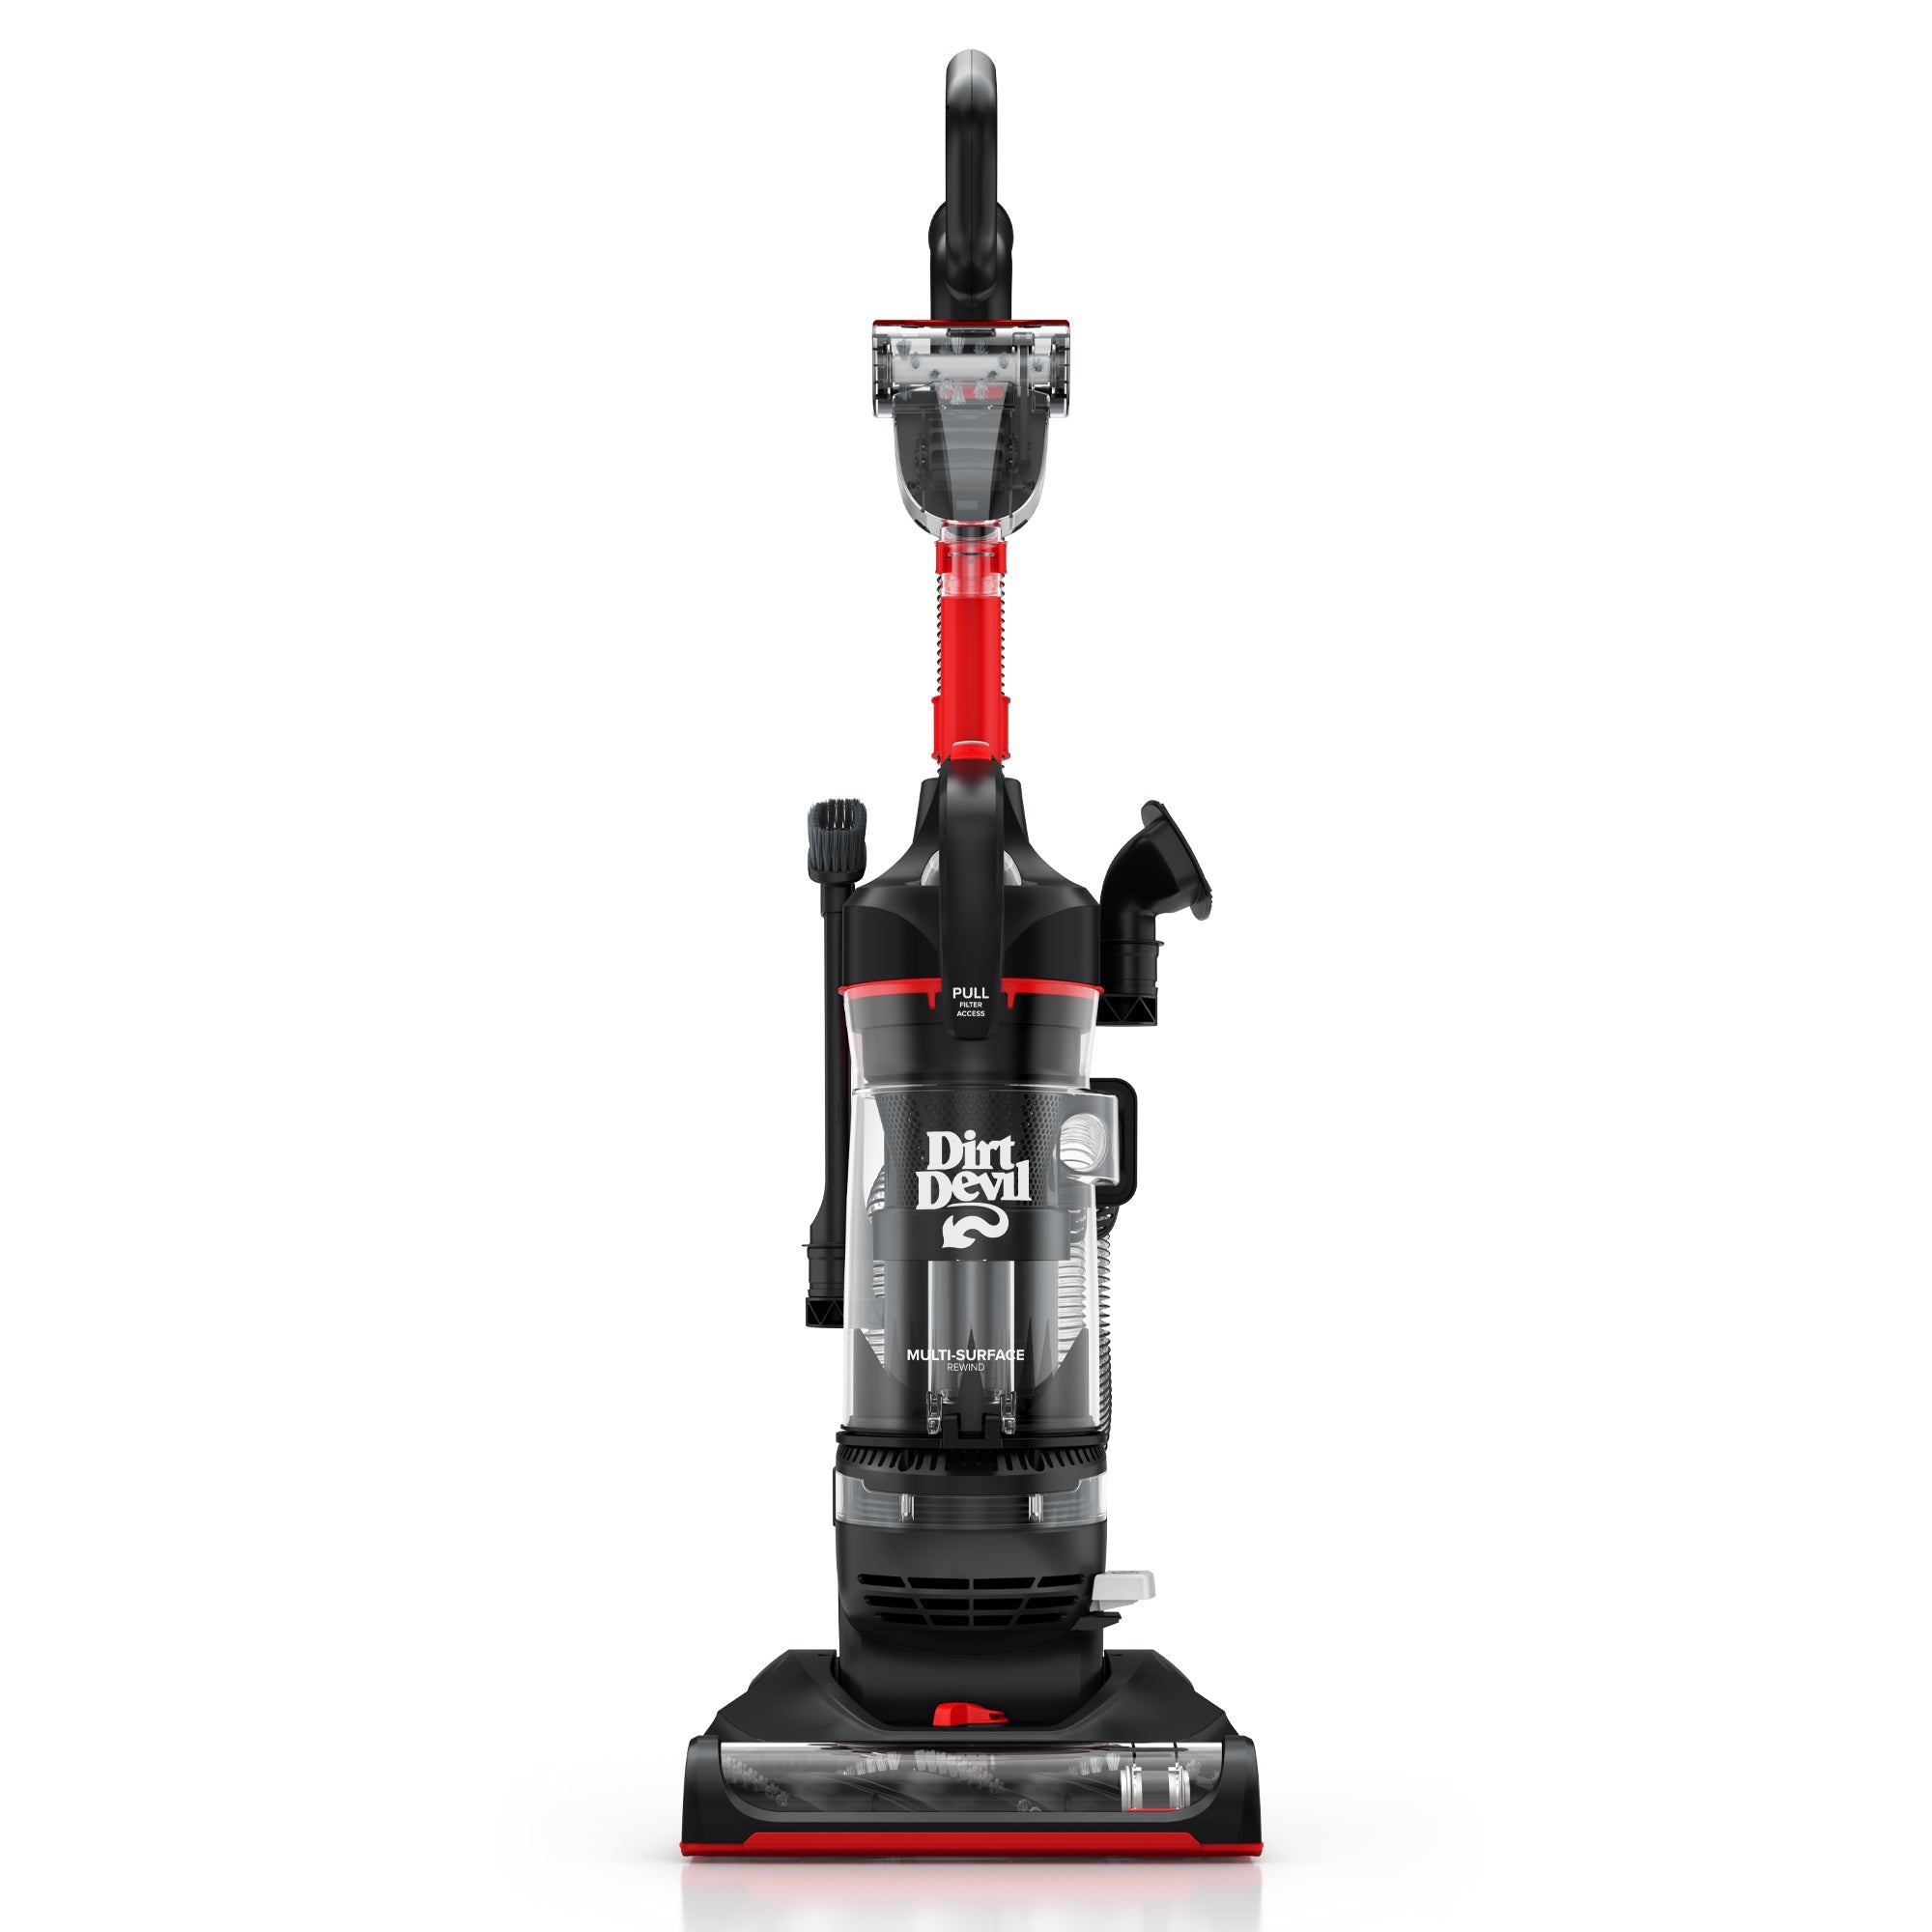 Dirt Devil Rewind Upright Vacuum showcased in front of a white background